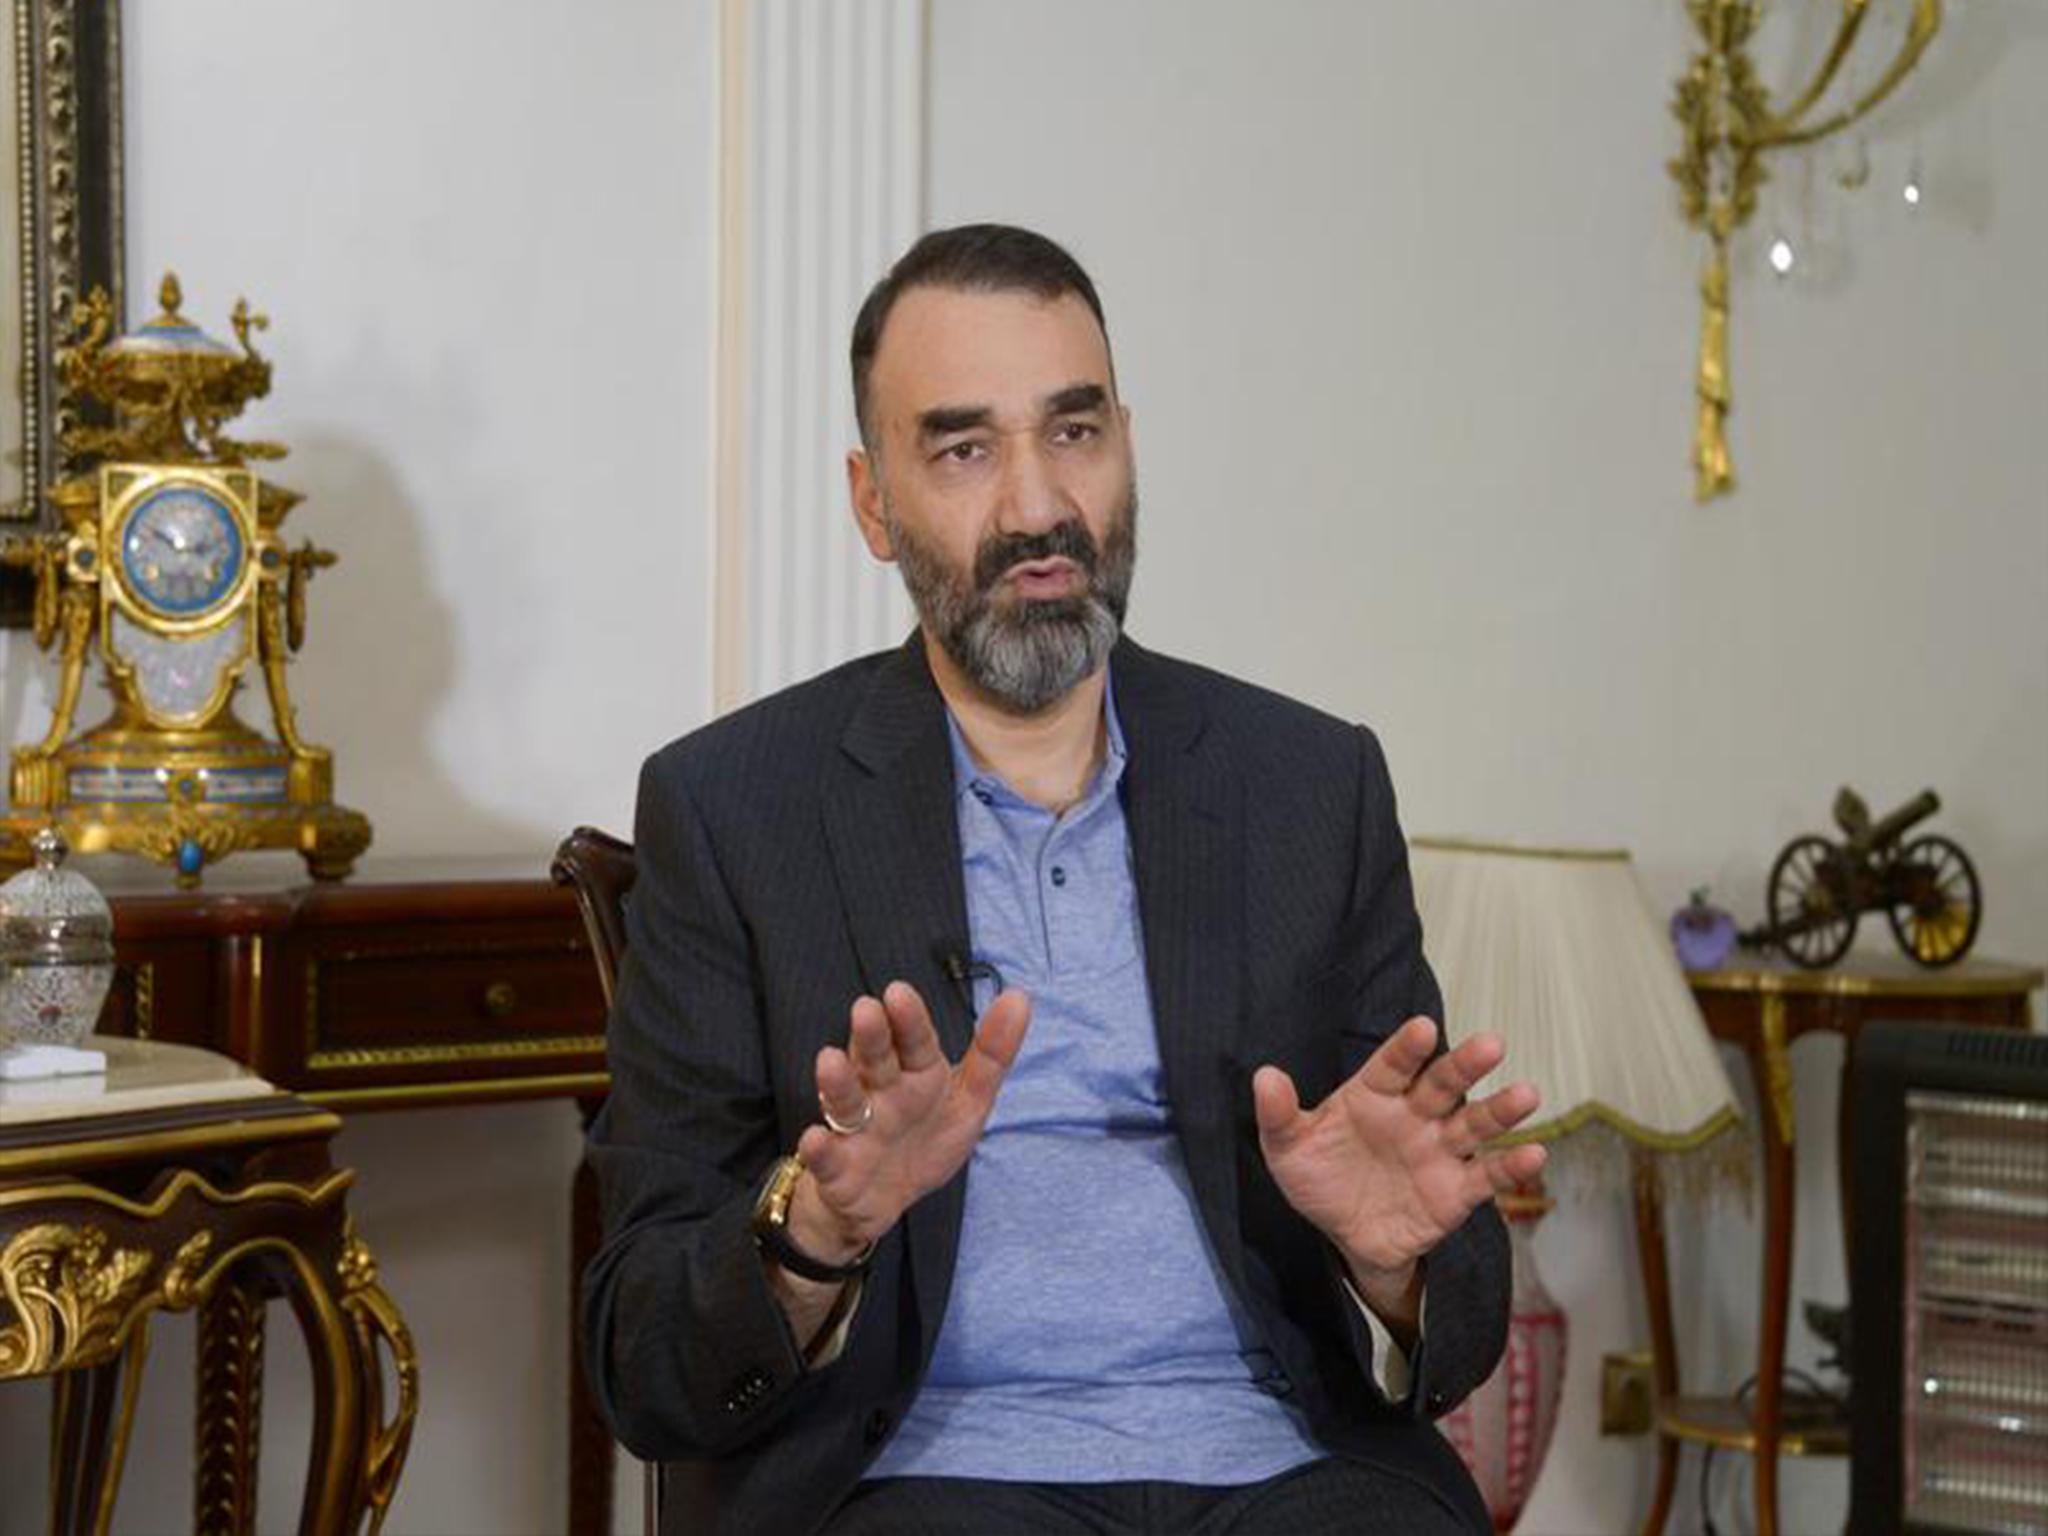 Atta Mohammad Noor accuses the president of trying to oust a potential rival Reuters/Anil Usyan